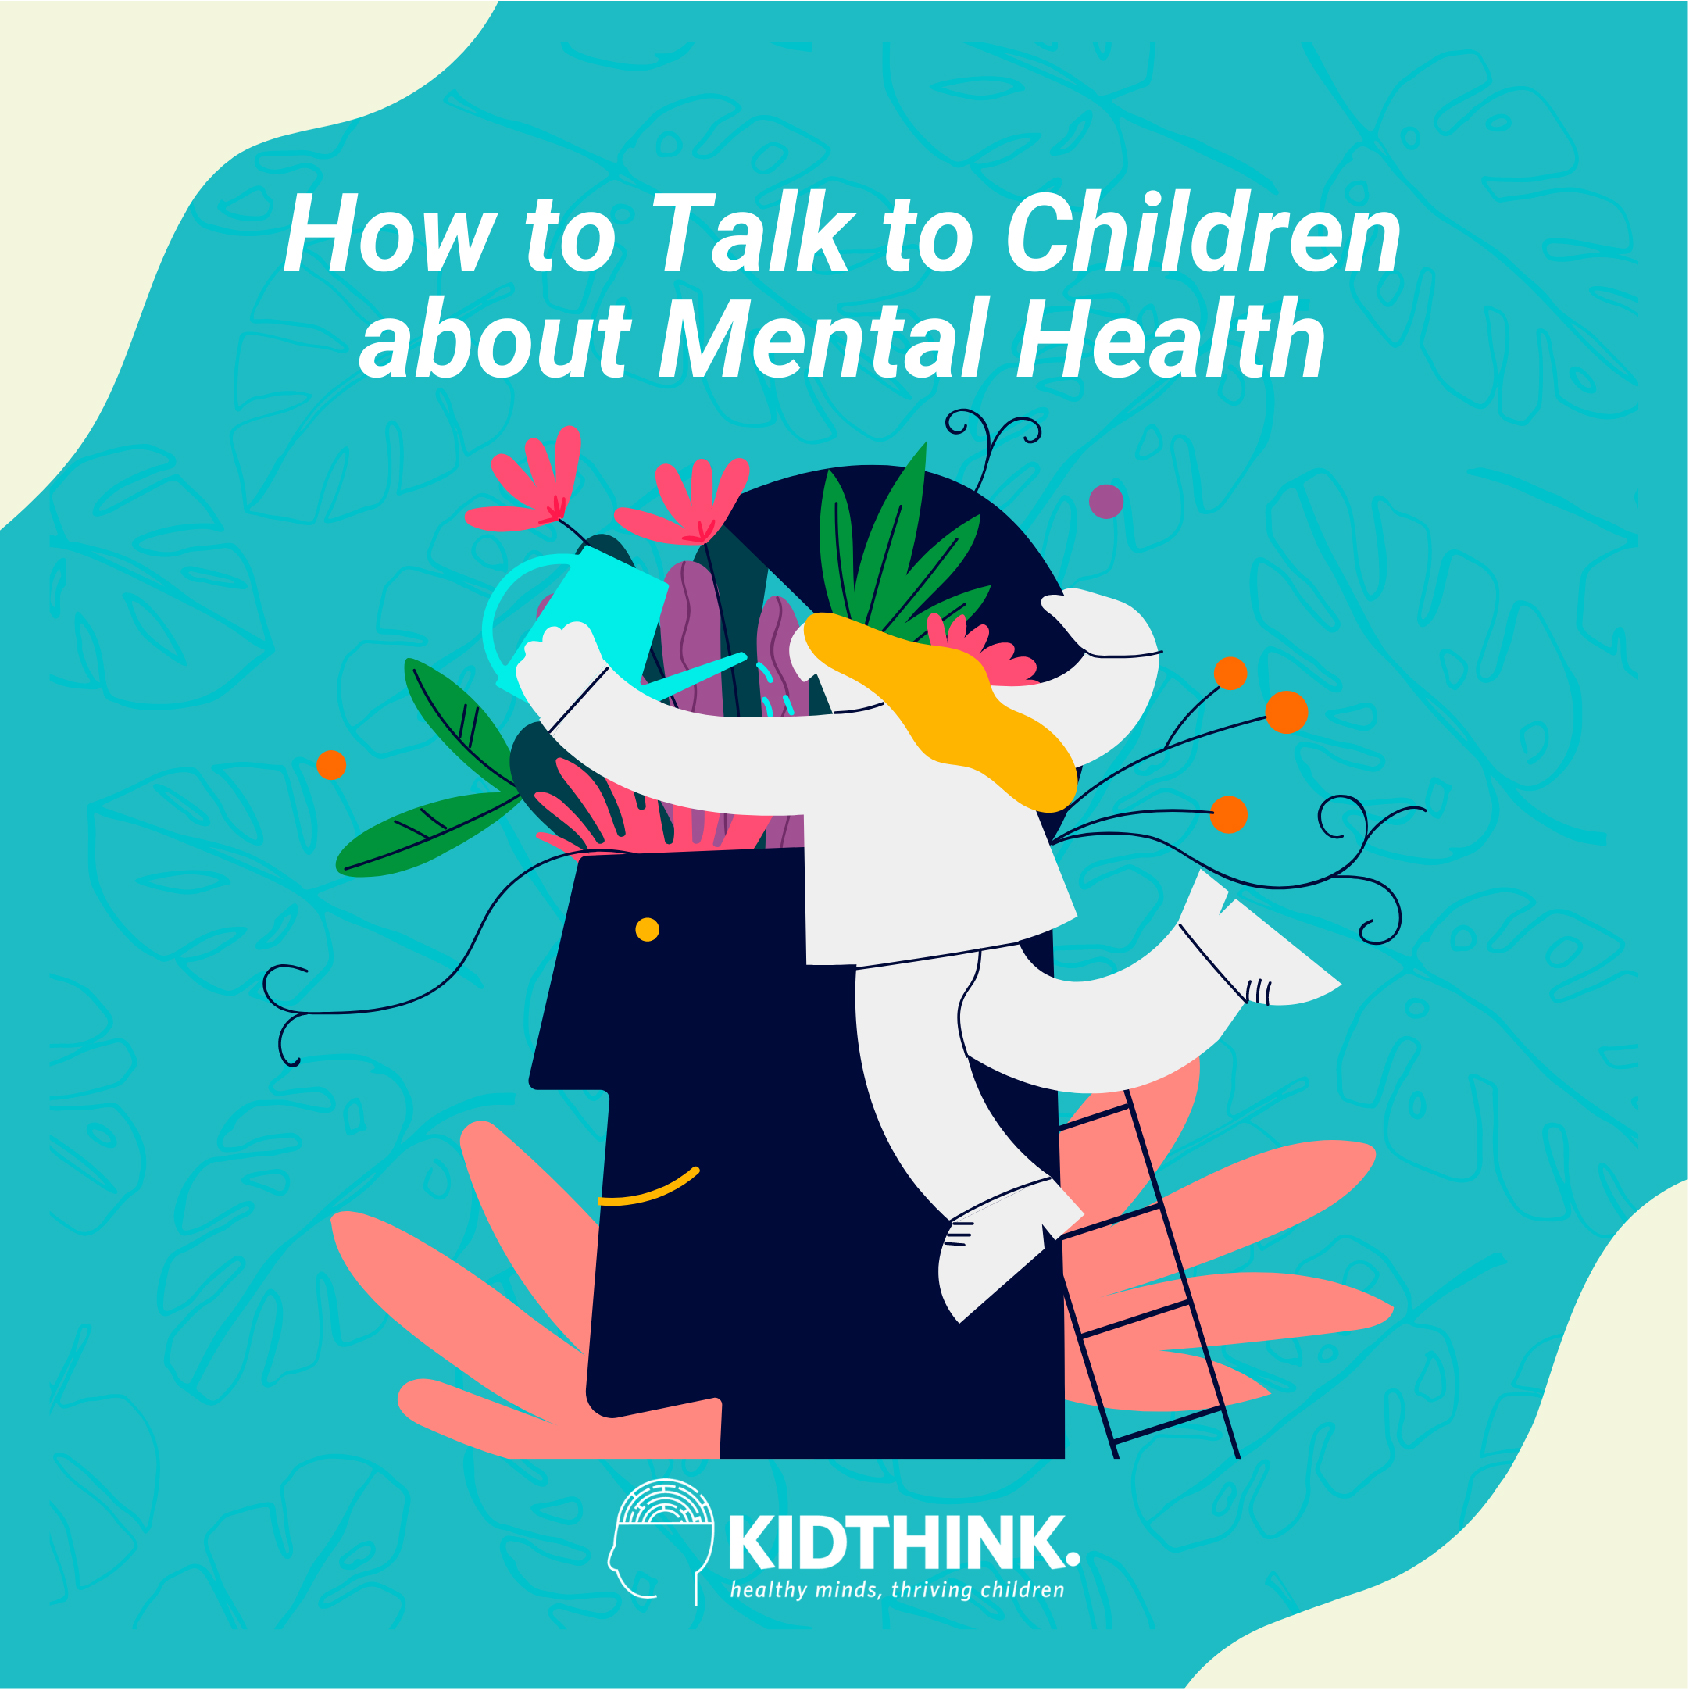 How to Talk to Children About Mental Health - KIDTHINK